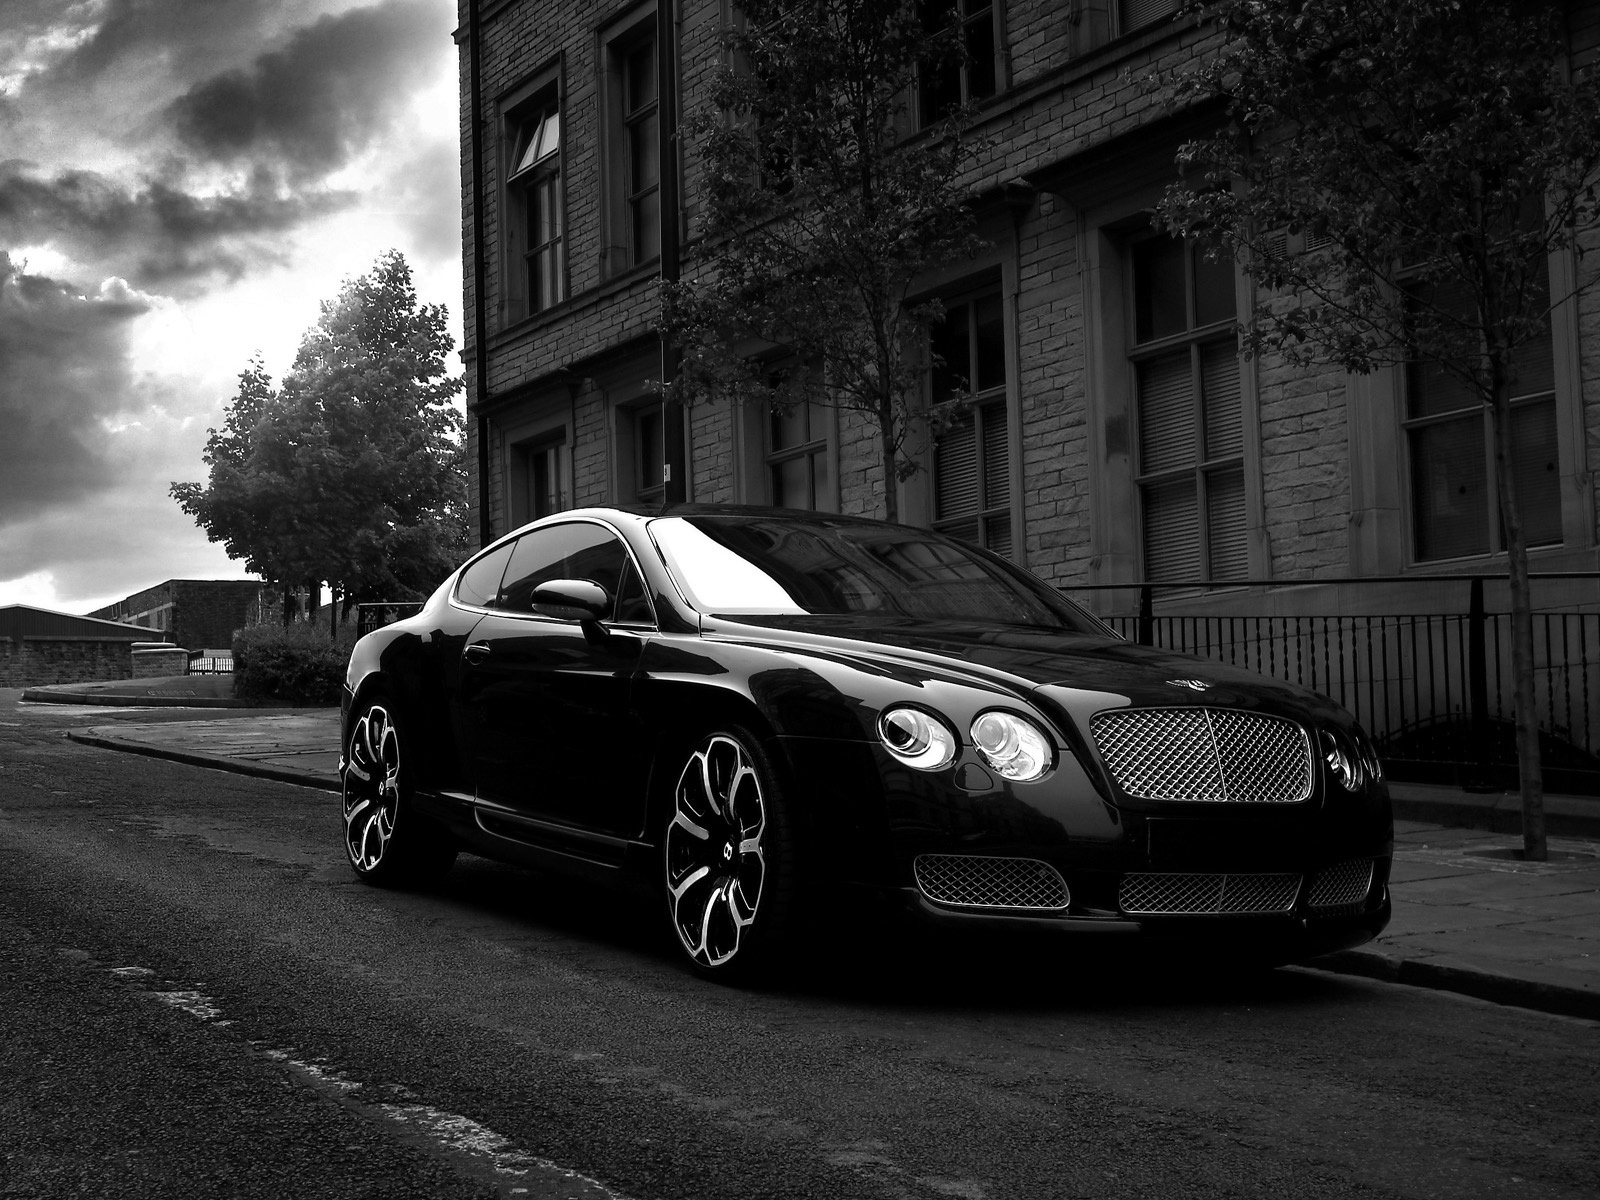 Bentley GTS Black Edition Project Kahn 2008 for 1600 x 1200 resolution